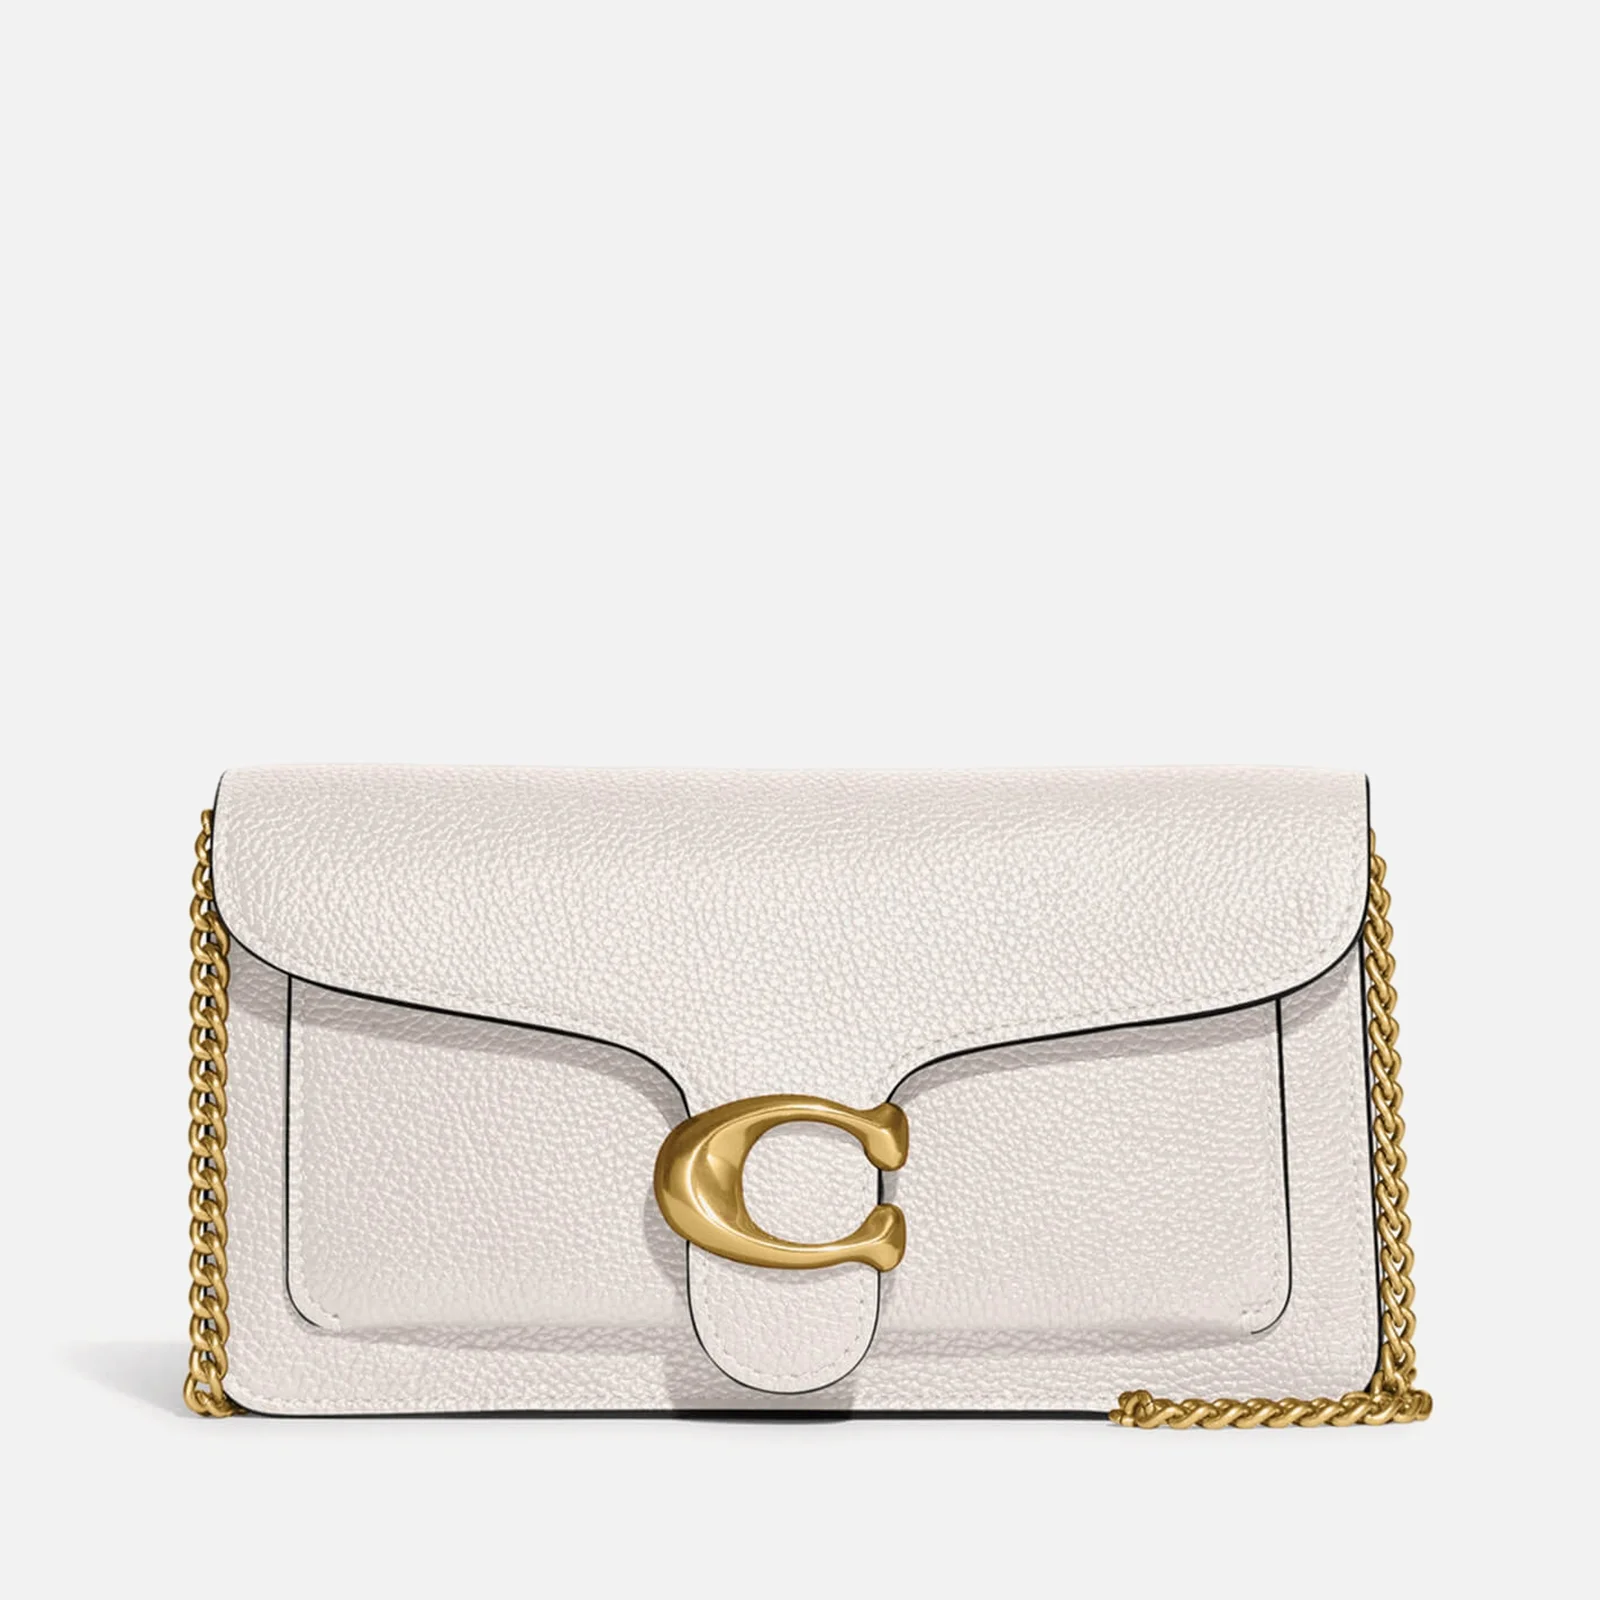 Coach Tabby Chain Leather Clutch Bag Image 1